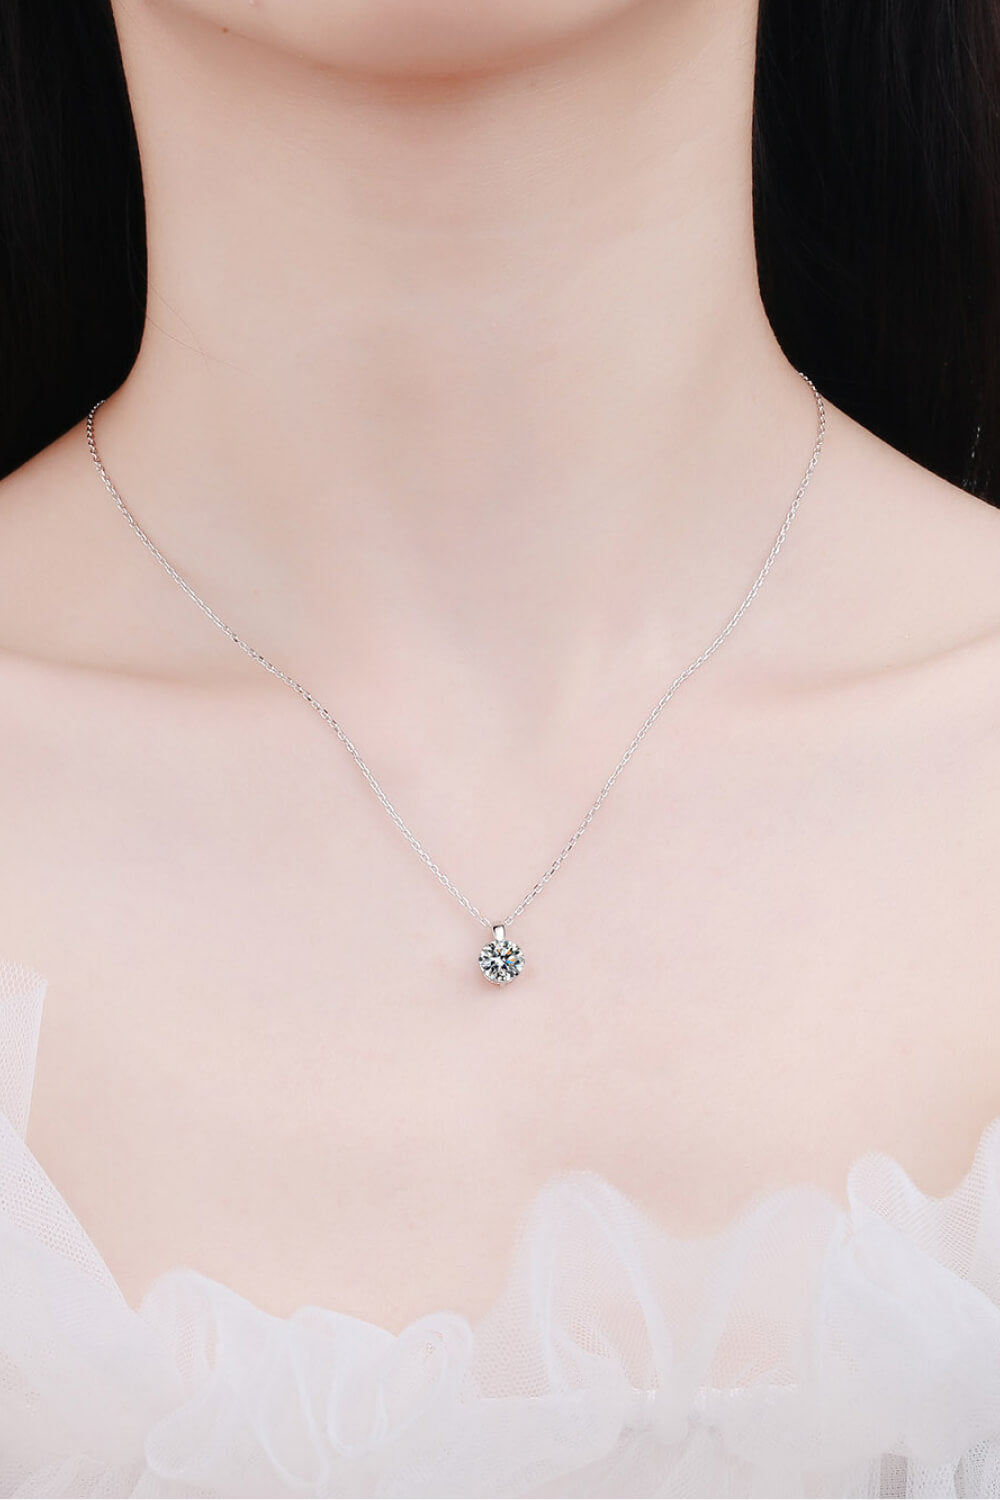 Minimalist 925 Sterling Silver Moissanite Pendant Necklace-Necklaces-Inspired by Justeen-Women's Clothing Boutique in Chicago, Illinois